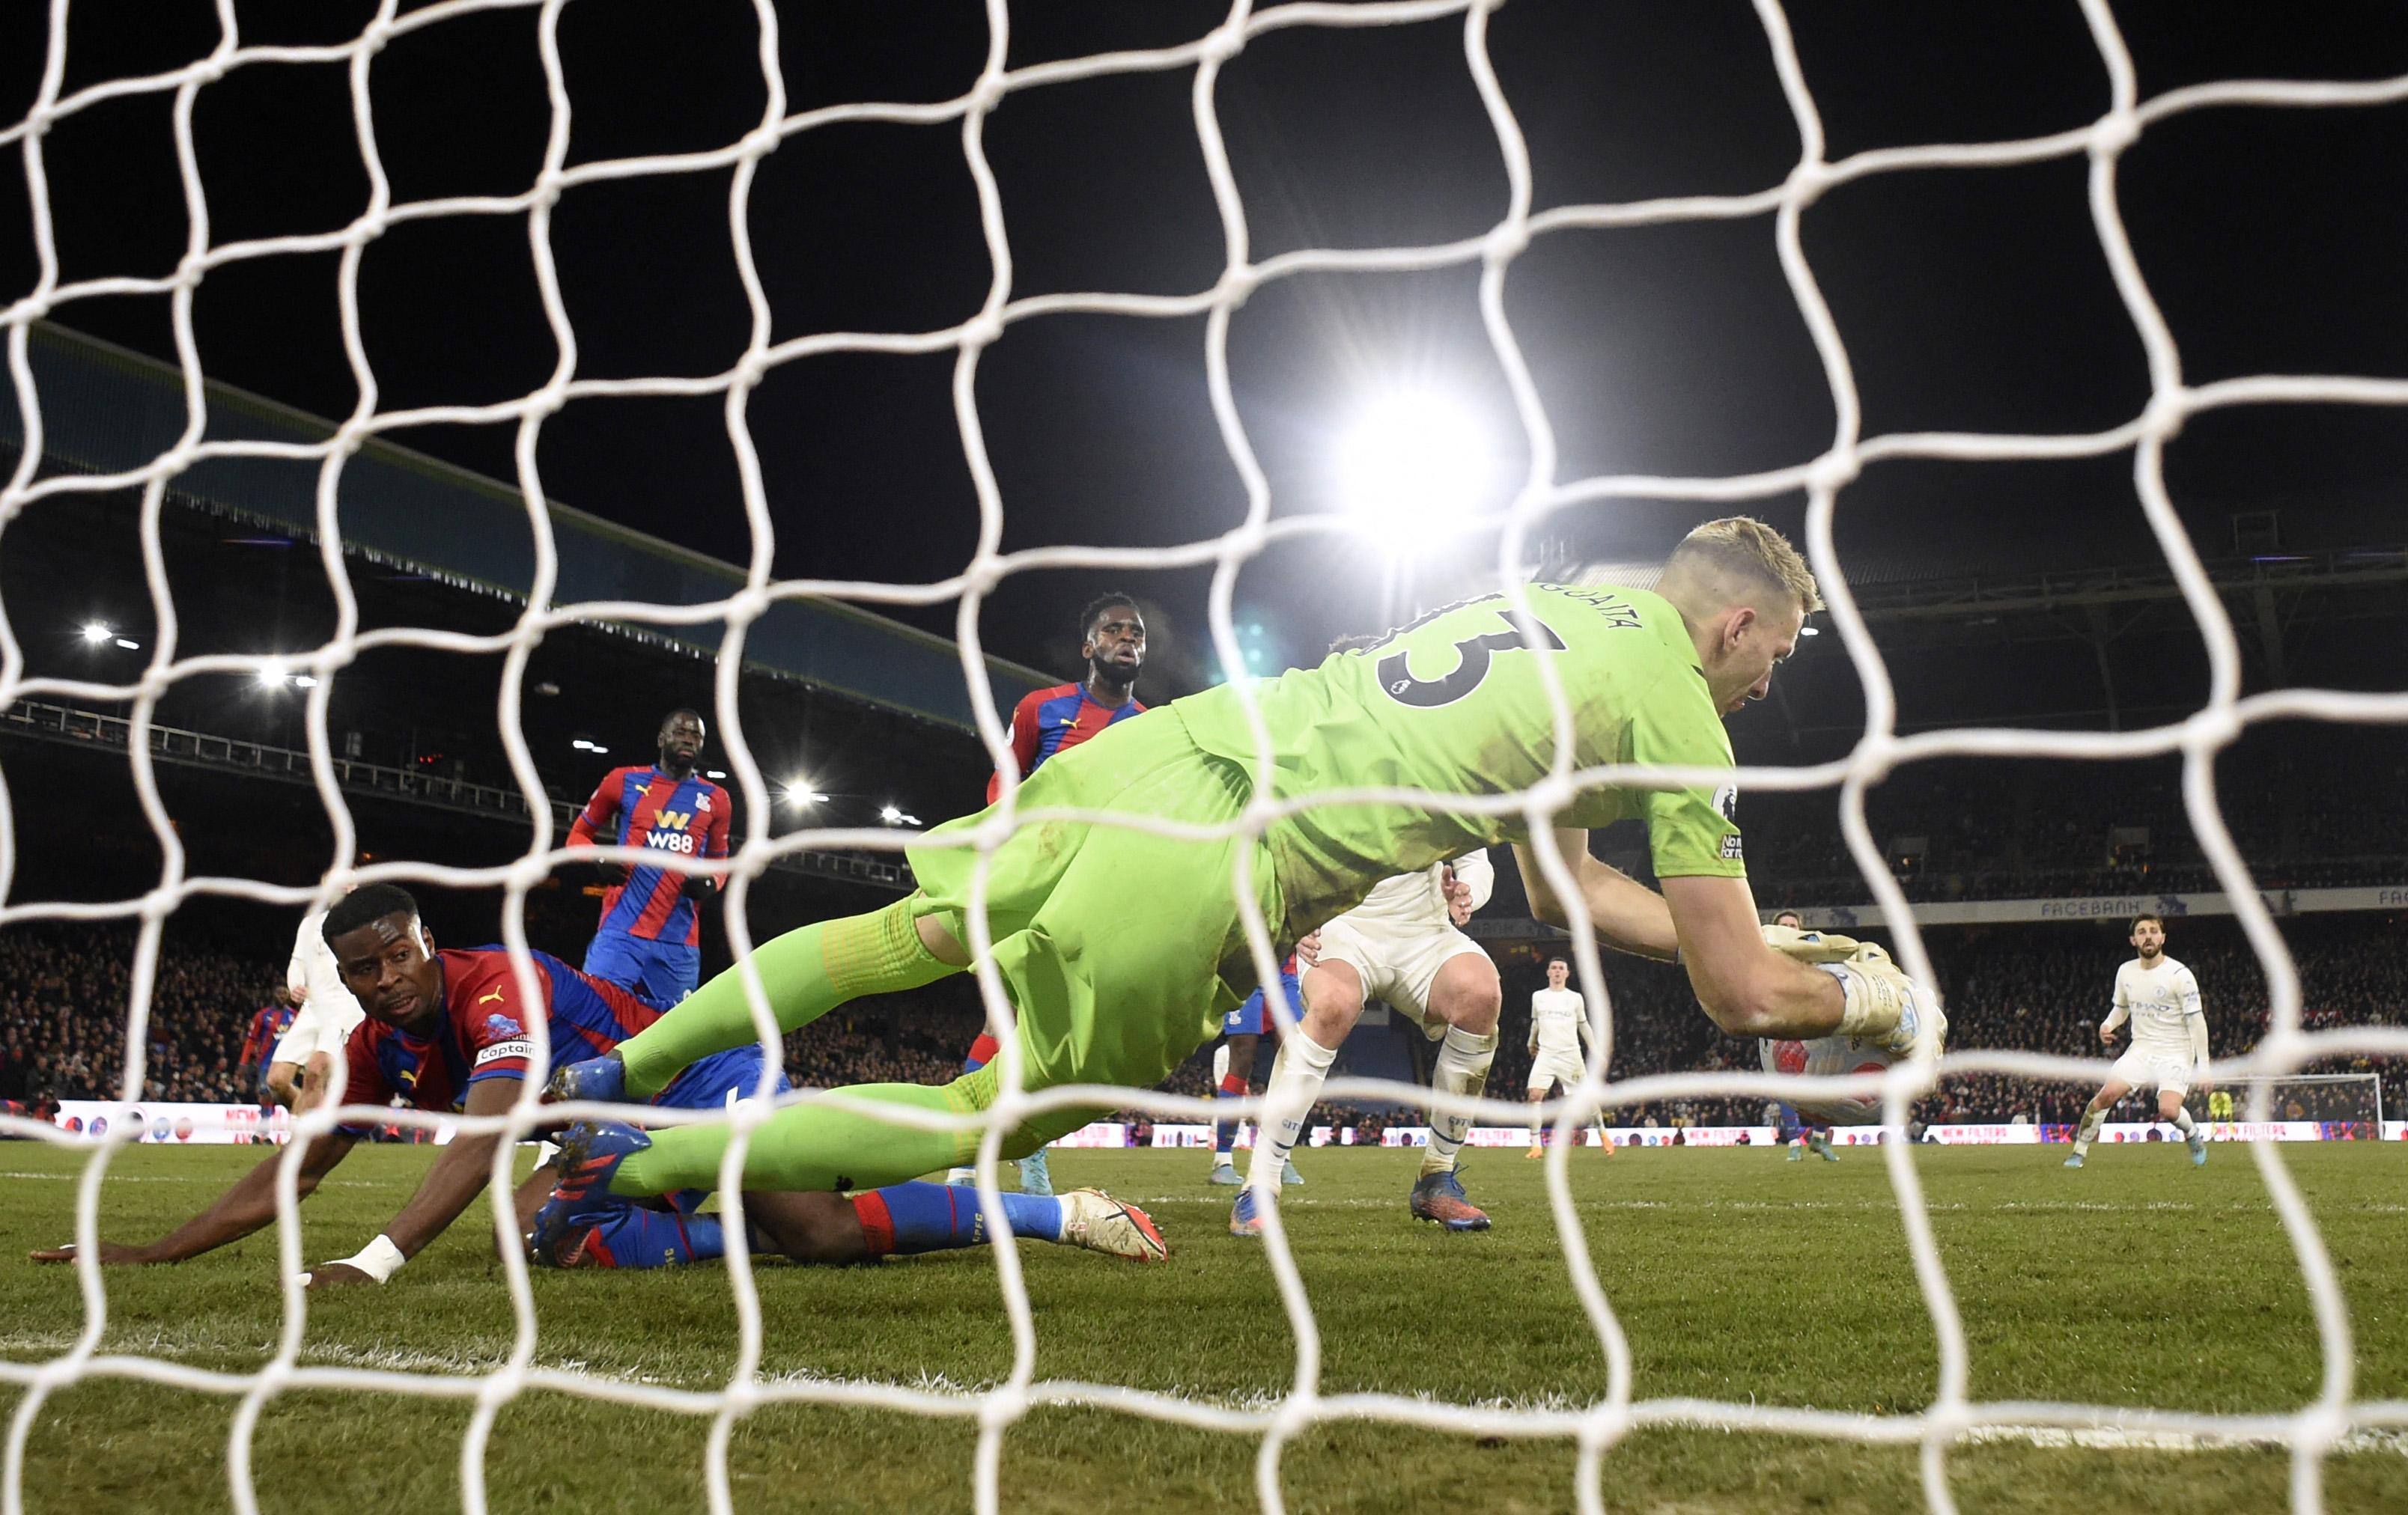 CRY 0-0 MCI: Gritty Crystal Palace hold Premier League leaders Manchester City to goalless draw at Selhurst Park